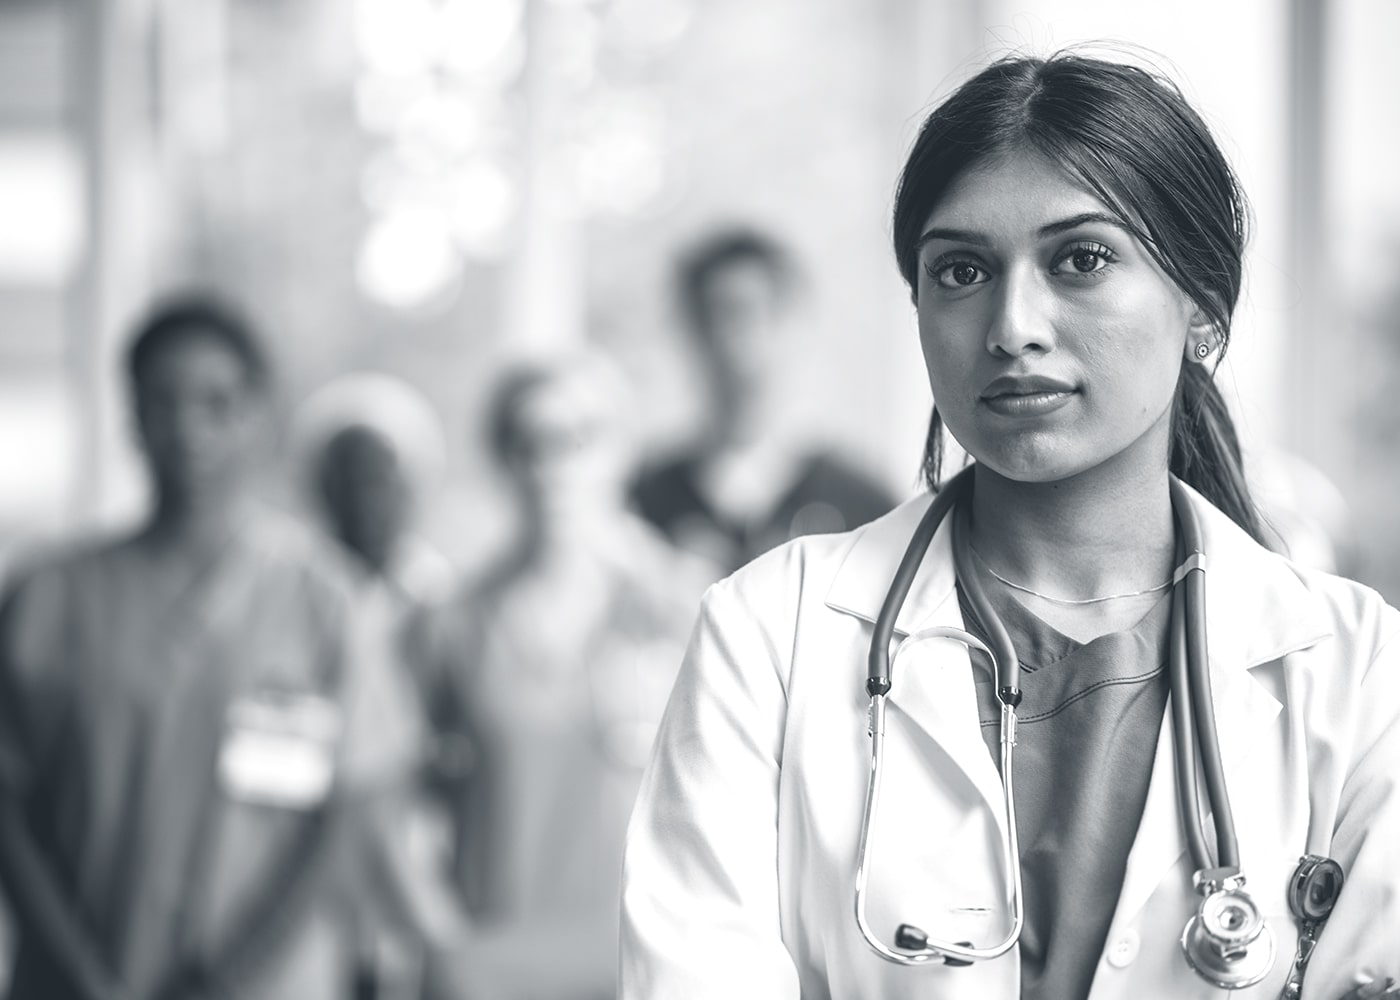 Female doctor looking straight ahead with medical staff blurred in the background